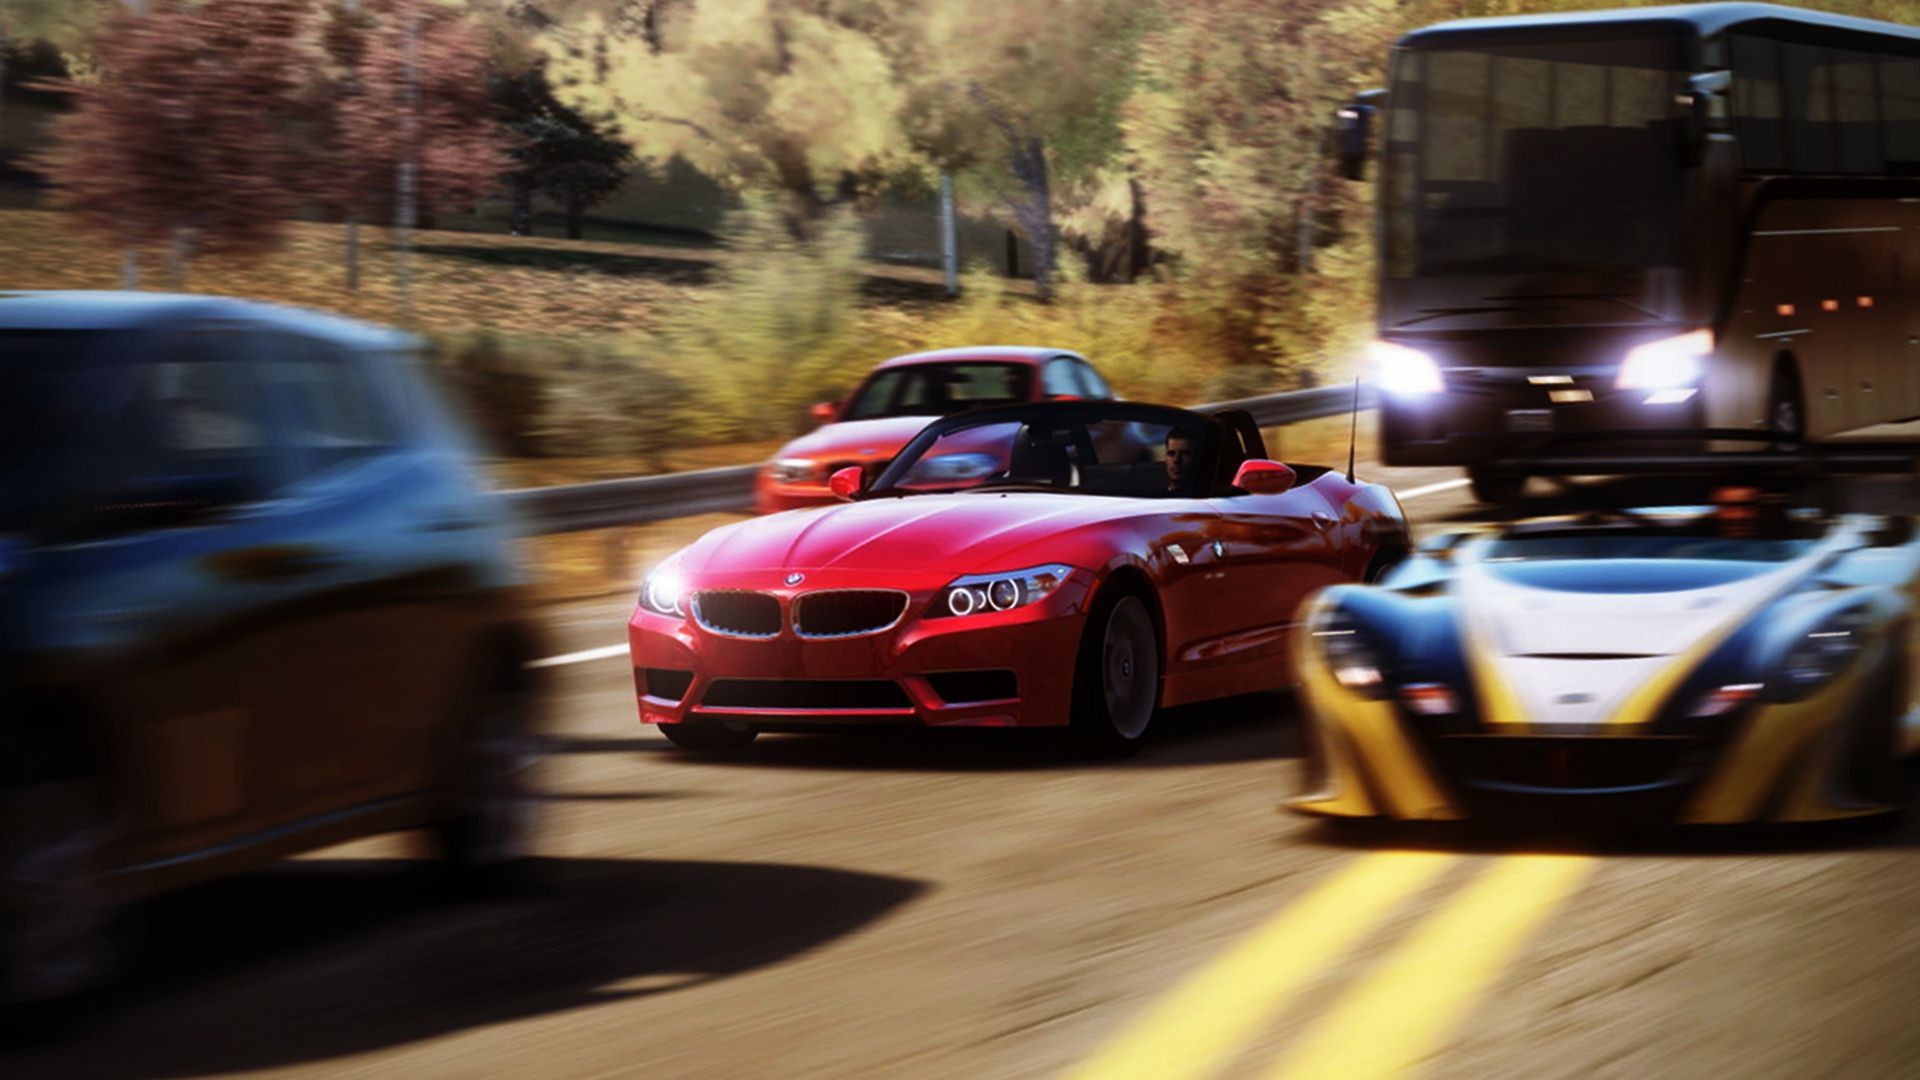 October By Admin Ments Off On Forza Horizon HD Wallpaper